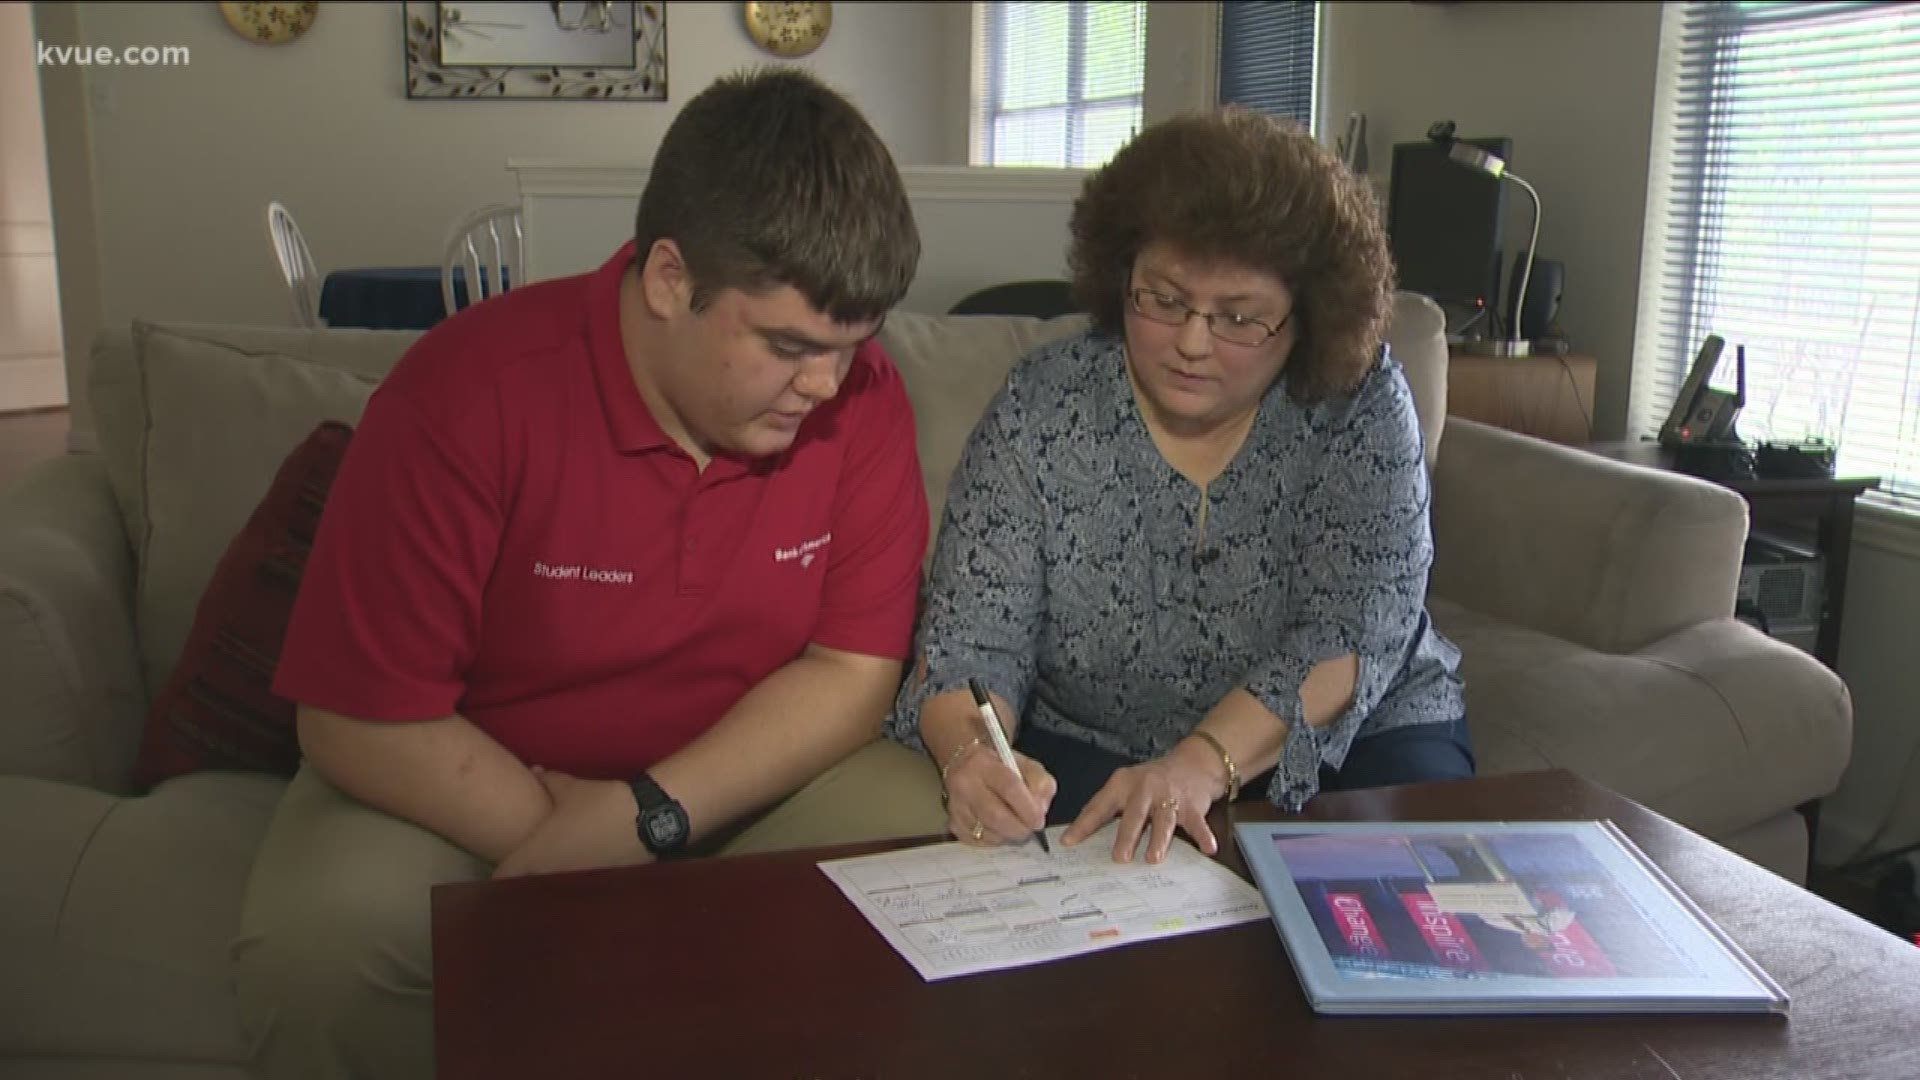 An Austin teen with autism is sharing his story of bullying and survival.